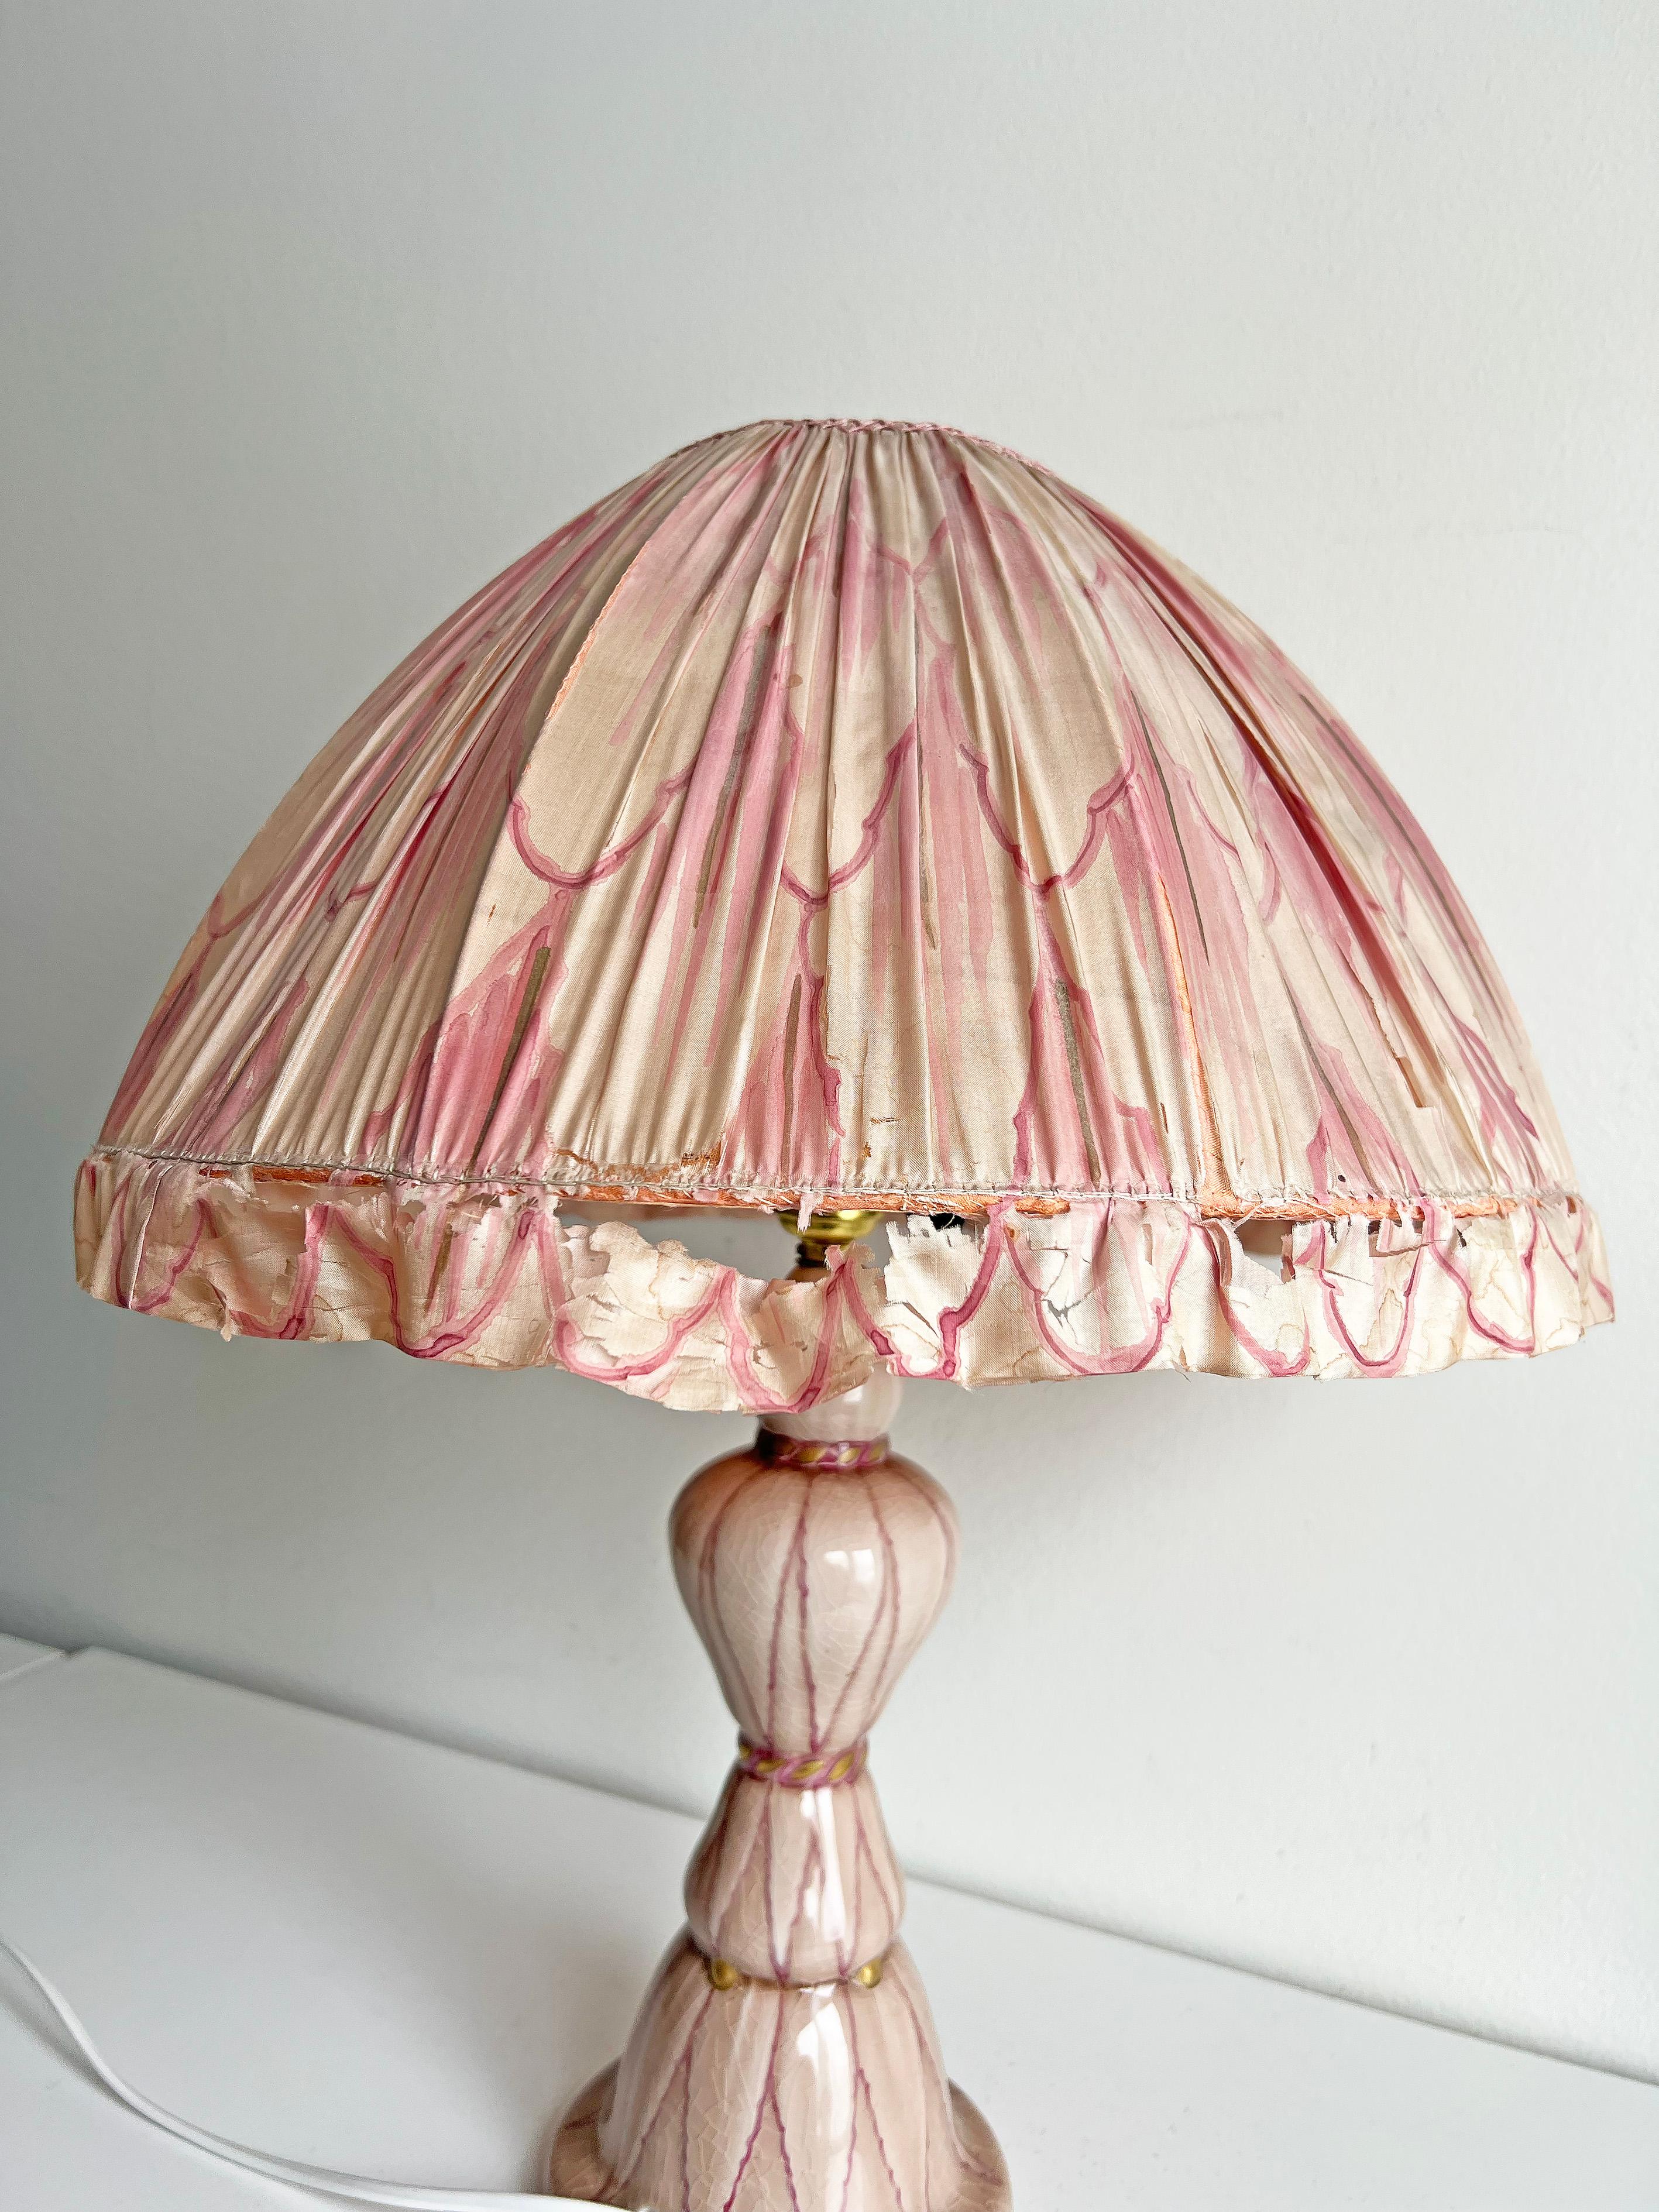 Swedish Grace Pink Ceramic Table Lamp by Louise Adelborg for Rörstrand, Ca1920s For Sale 2